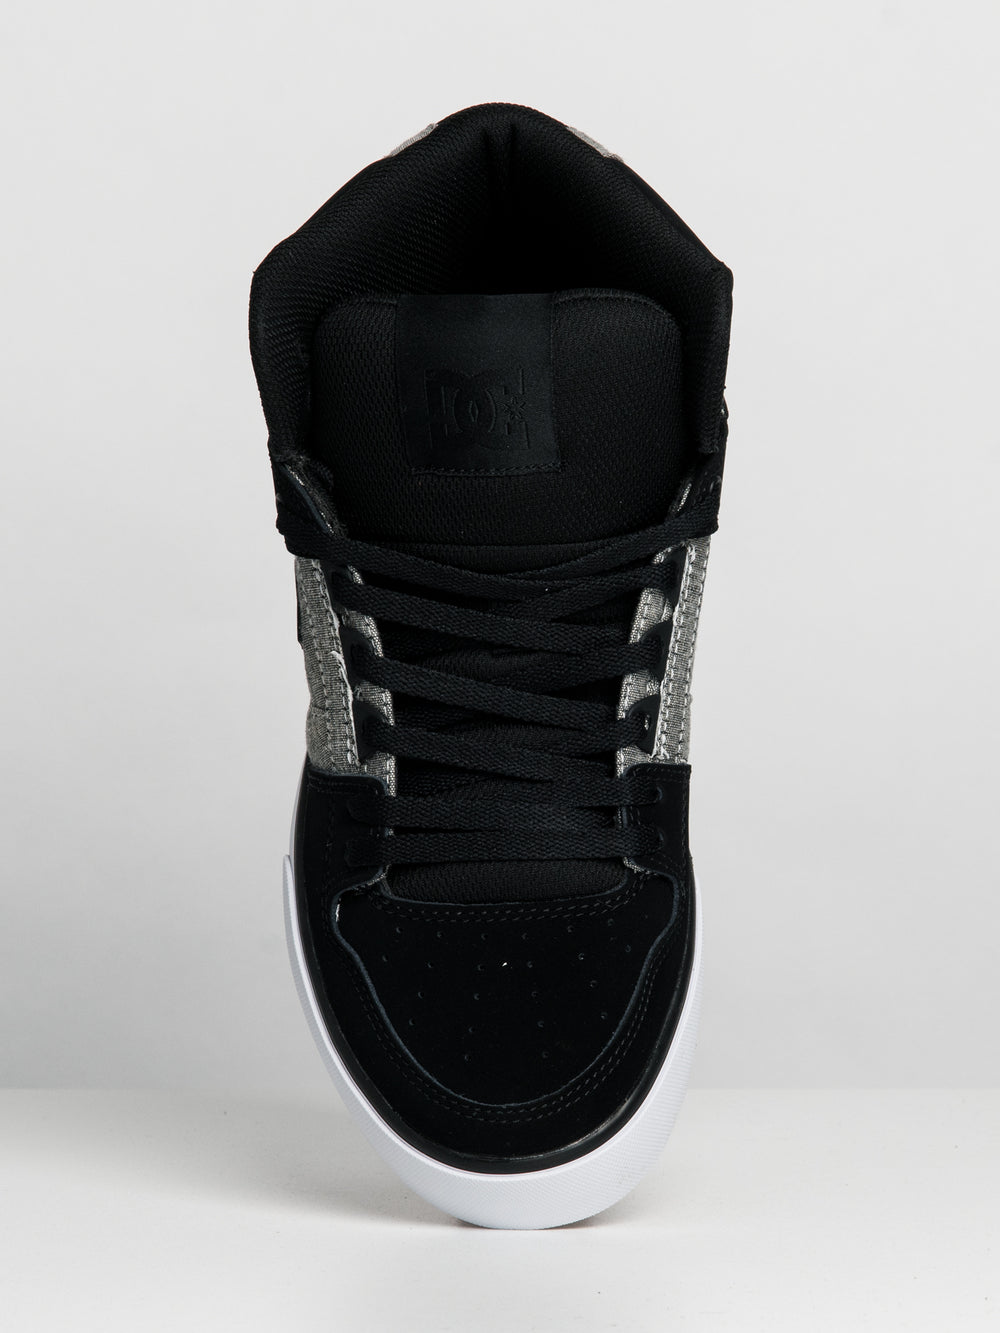 MENS DC SHOES PURE HIGH TOP SNEAKER - CLEARANCE